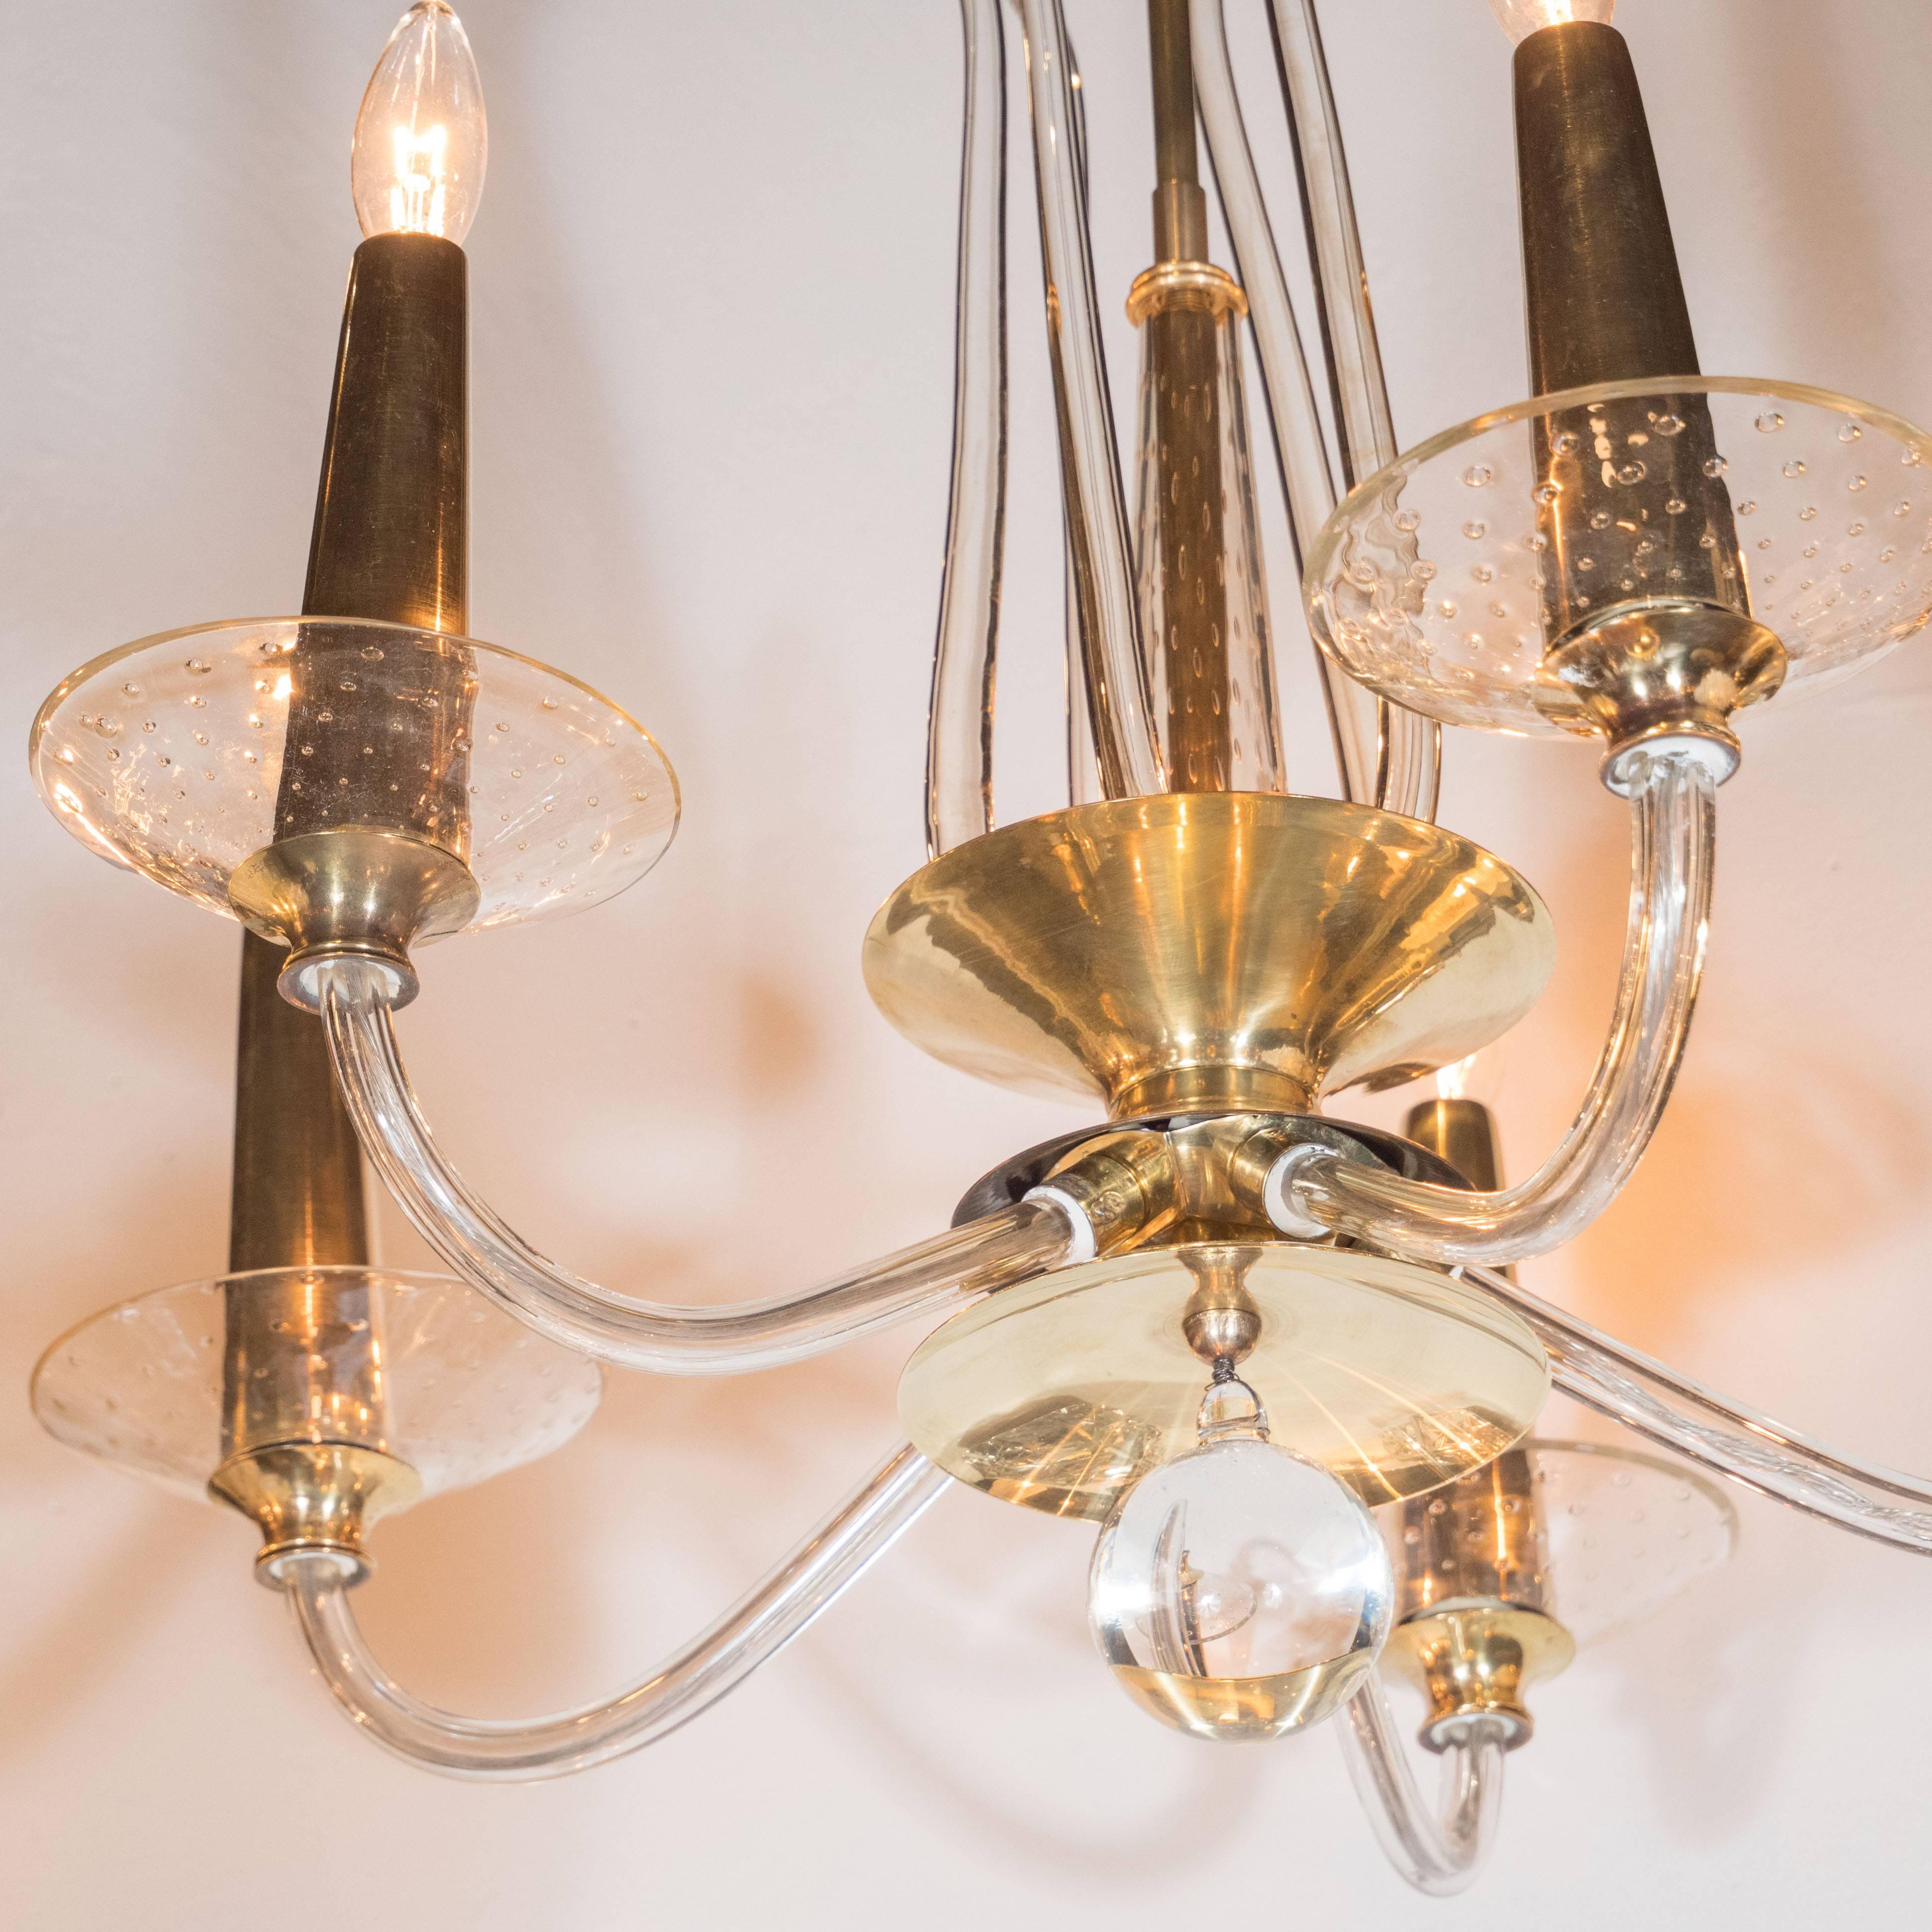 This stunning four-arm chandelier was handblown in Murano, Italy, the islands off the coast of Venice renowned for centuries for their superlative glass production. It features four curved arms that culminate in conical brass supports atop bobeches